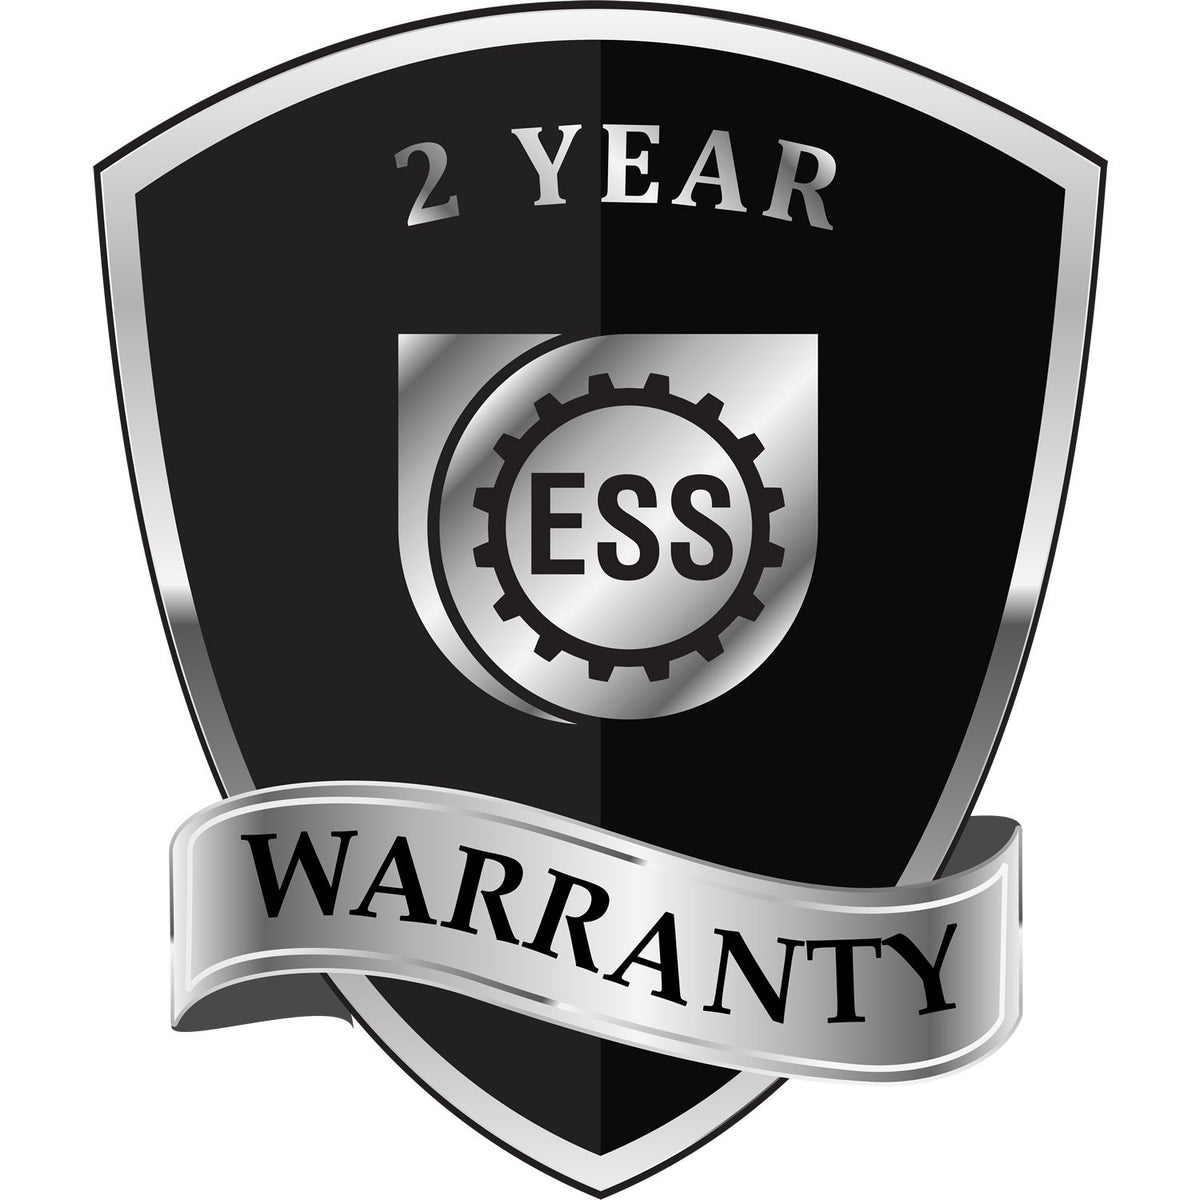 A black and silver badge or emblem showing warranty information for the Arizona Geologist Desk Seal